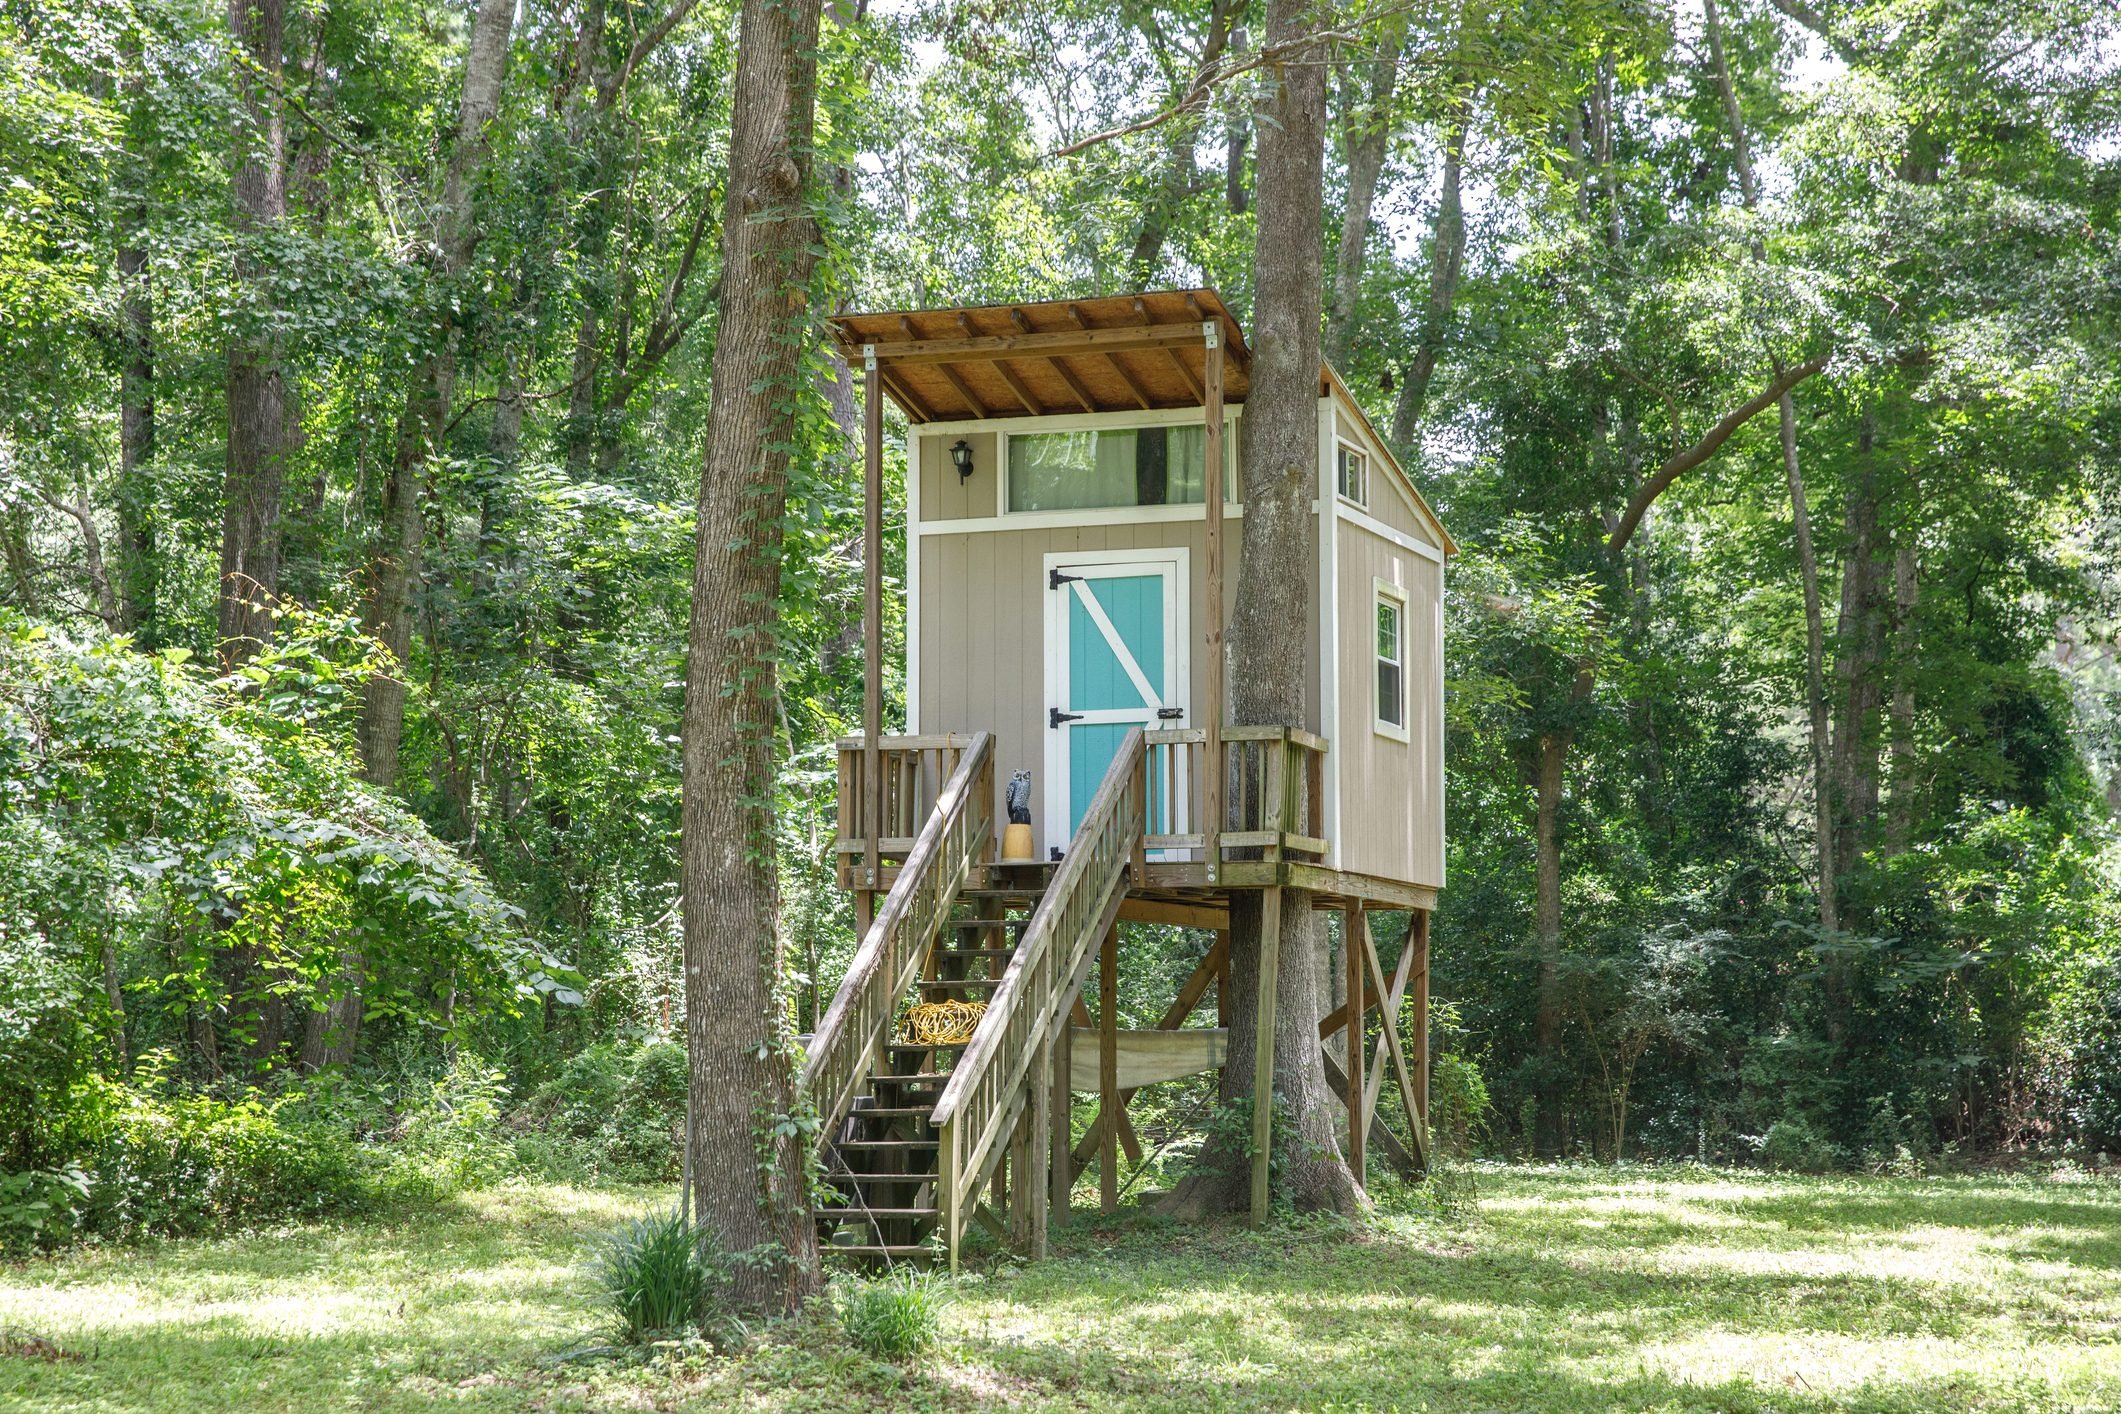 Tips To Make Sure Your Backyard Treehouse Is Safe